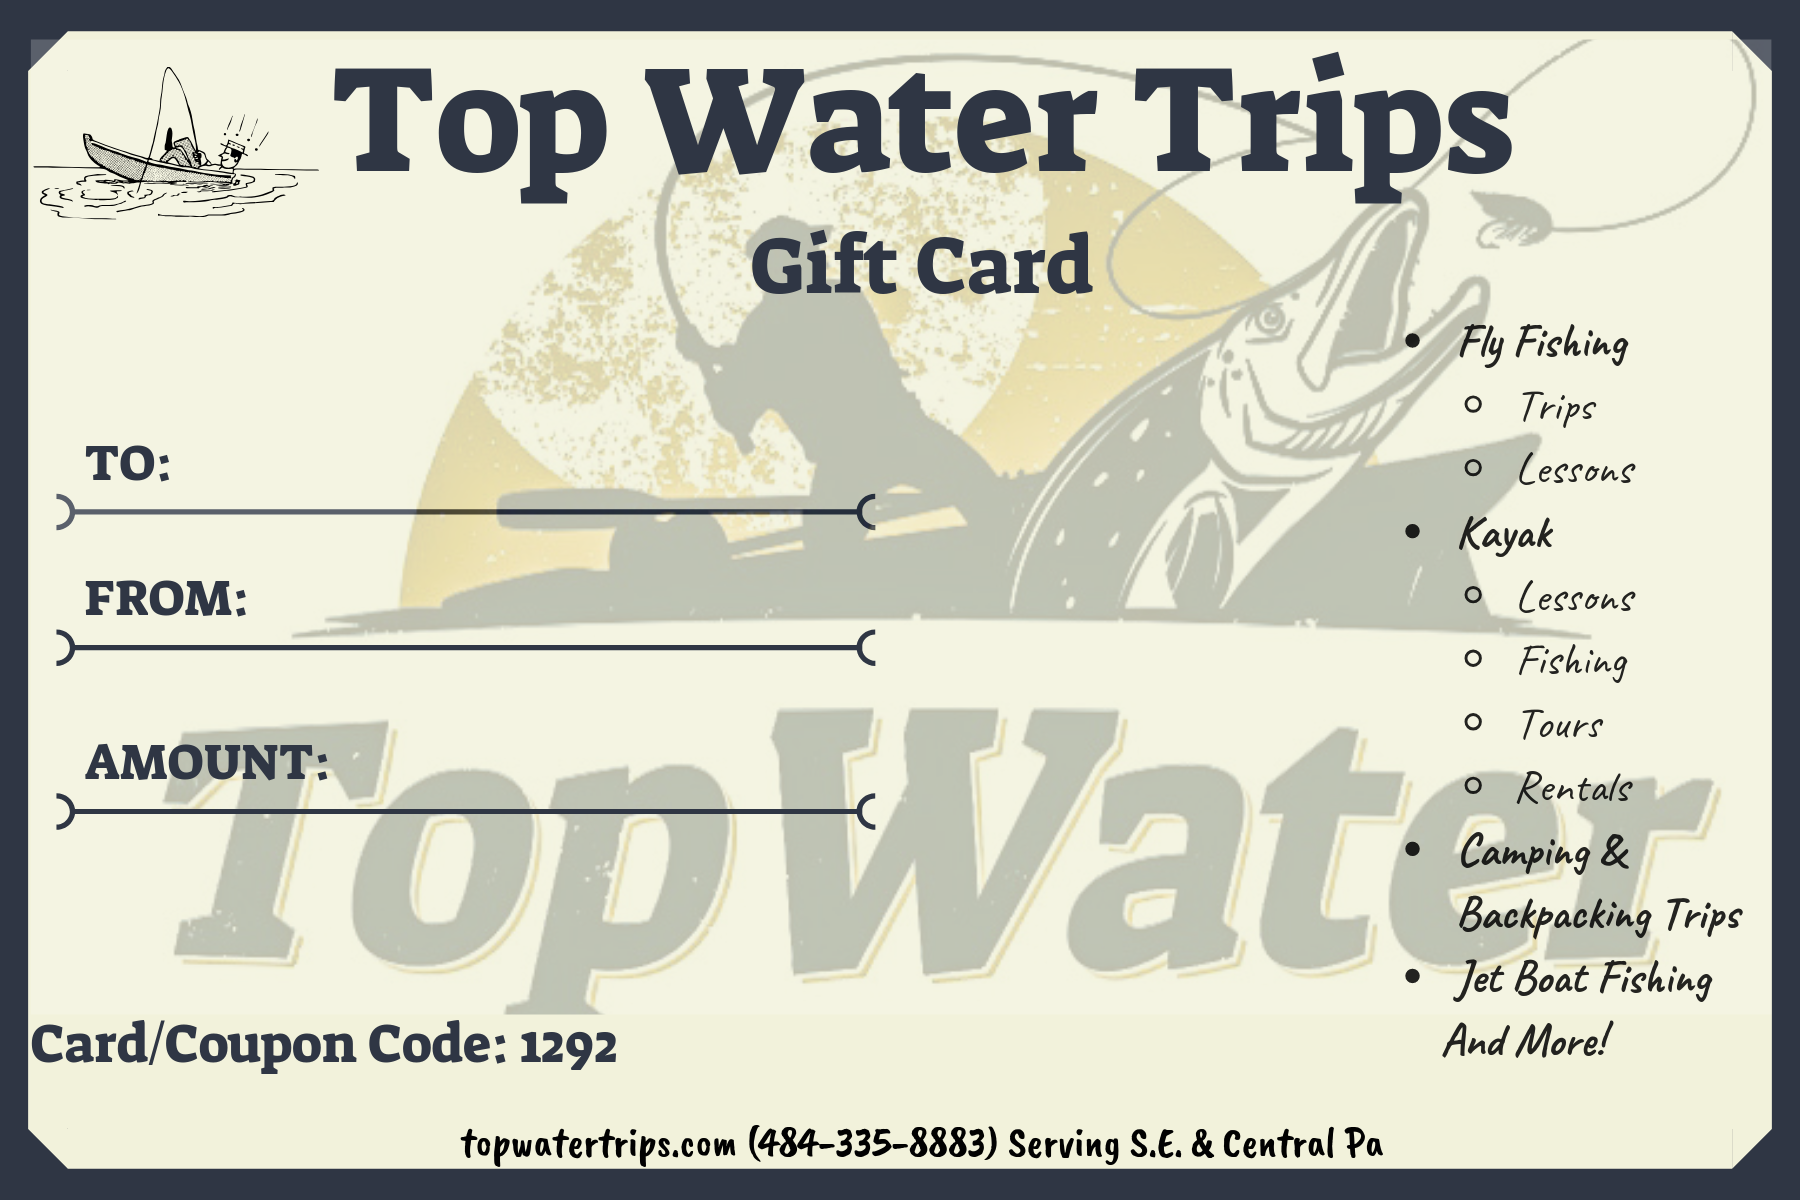 Gift Cards - Top Water Trips